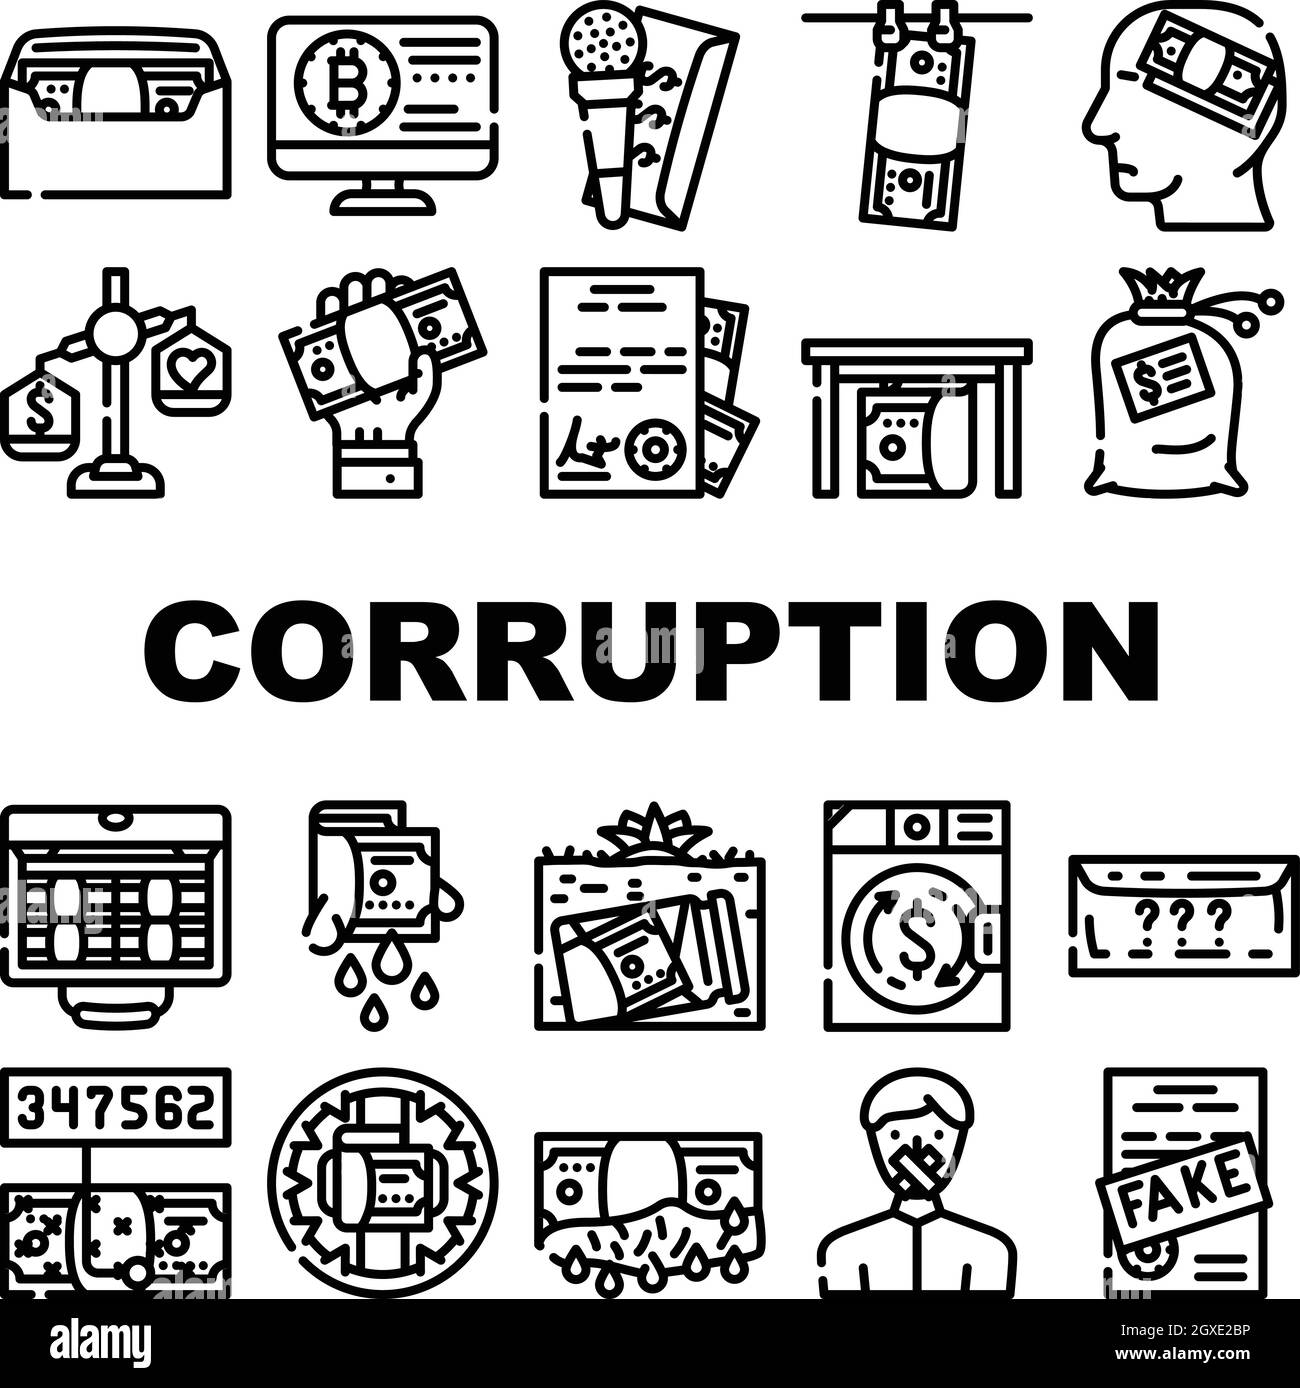 Corruption Problem Collection Icons Set Vector Stock Vector